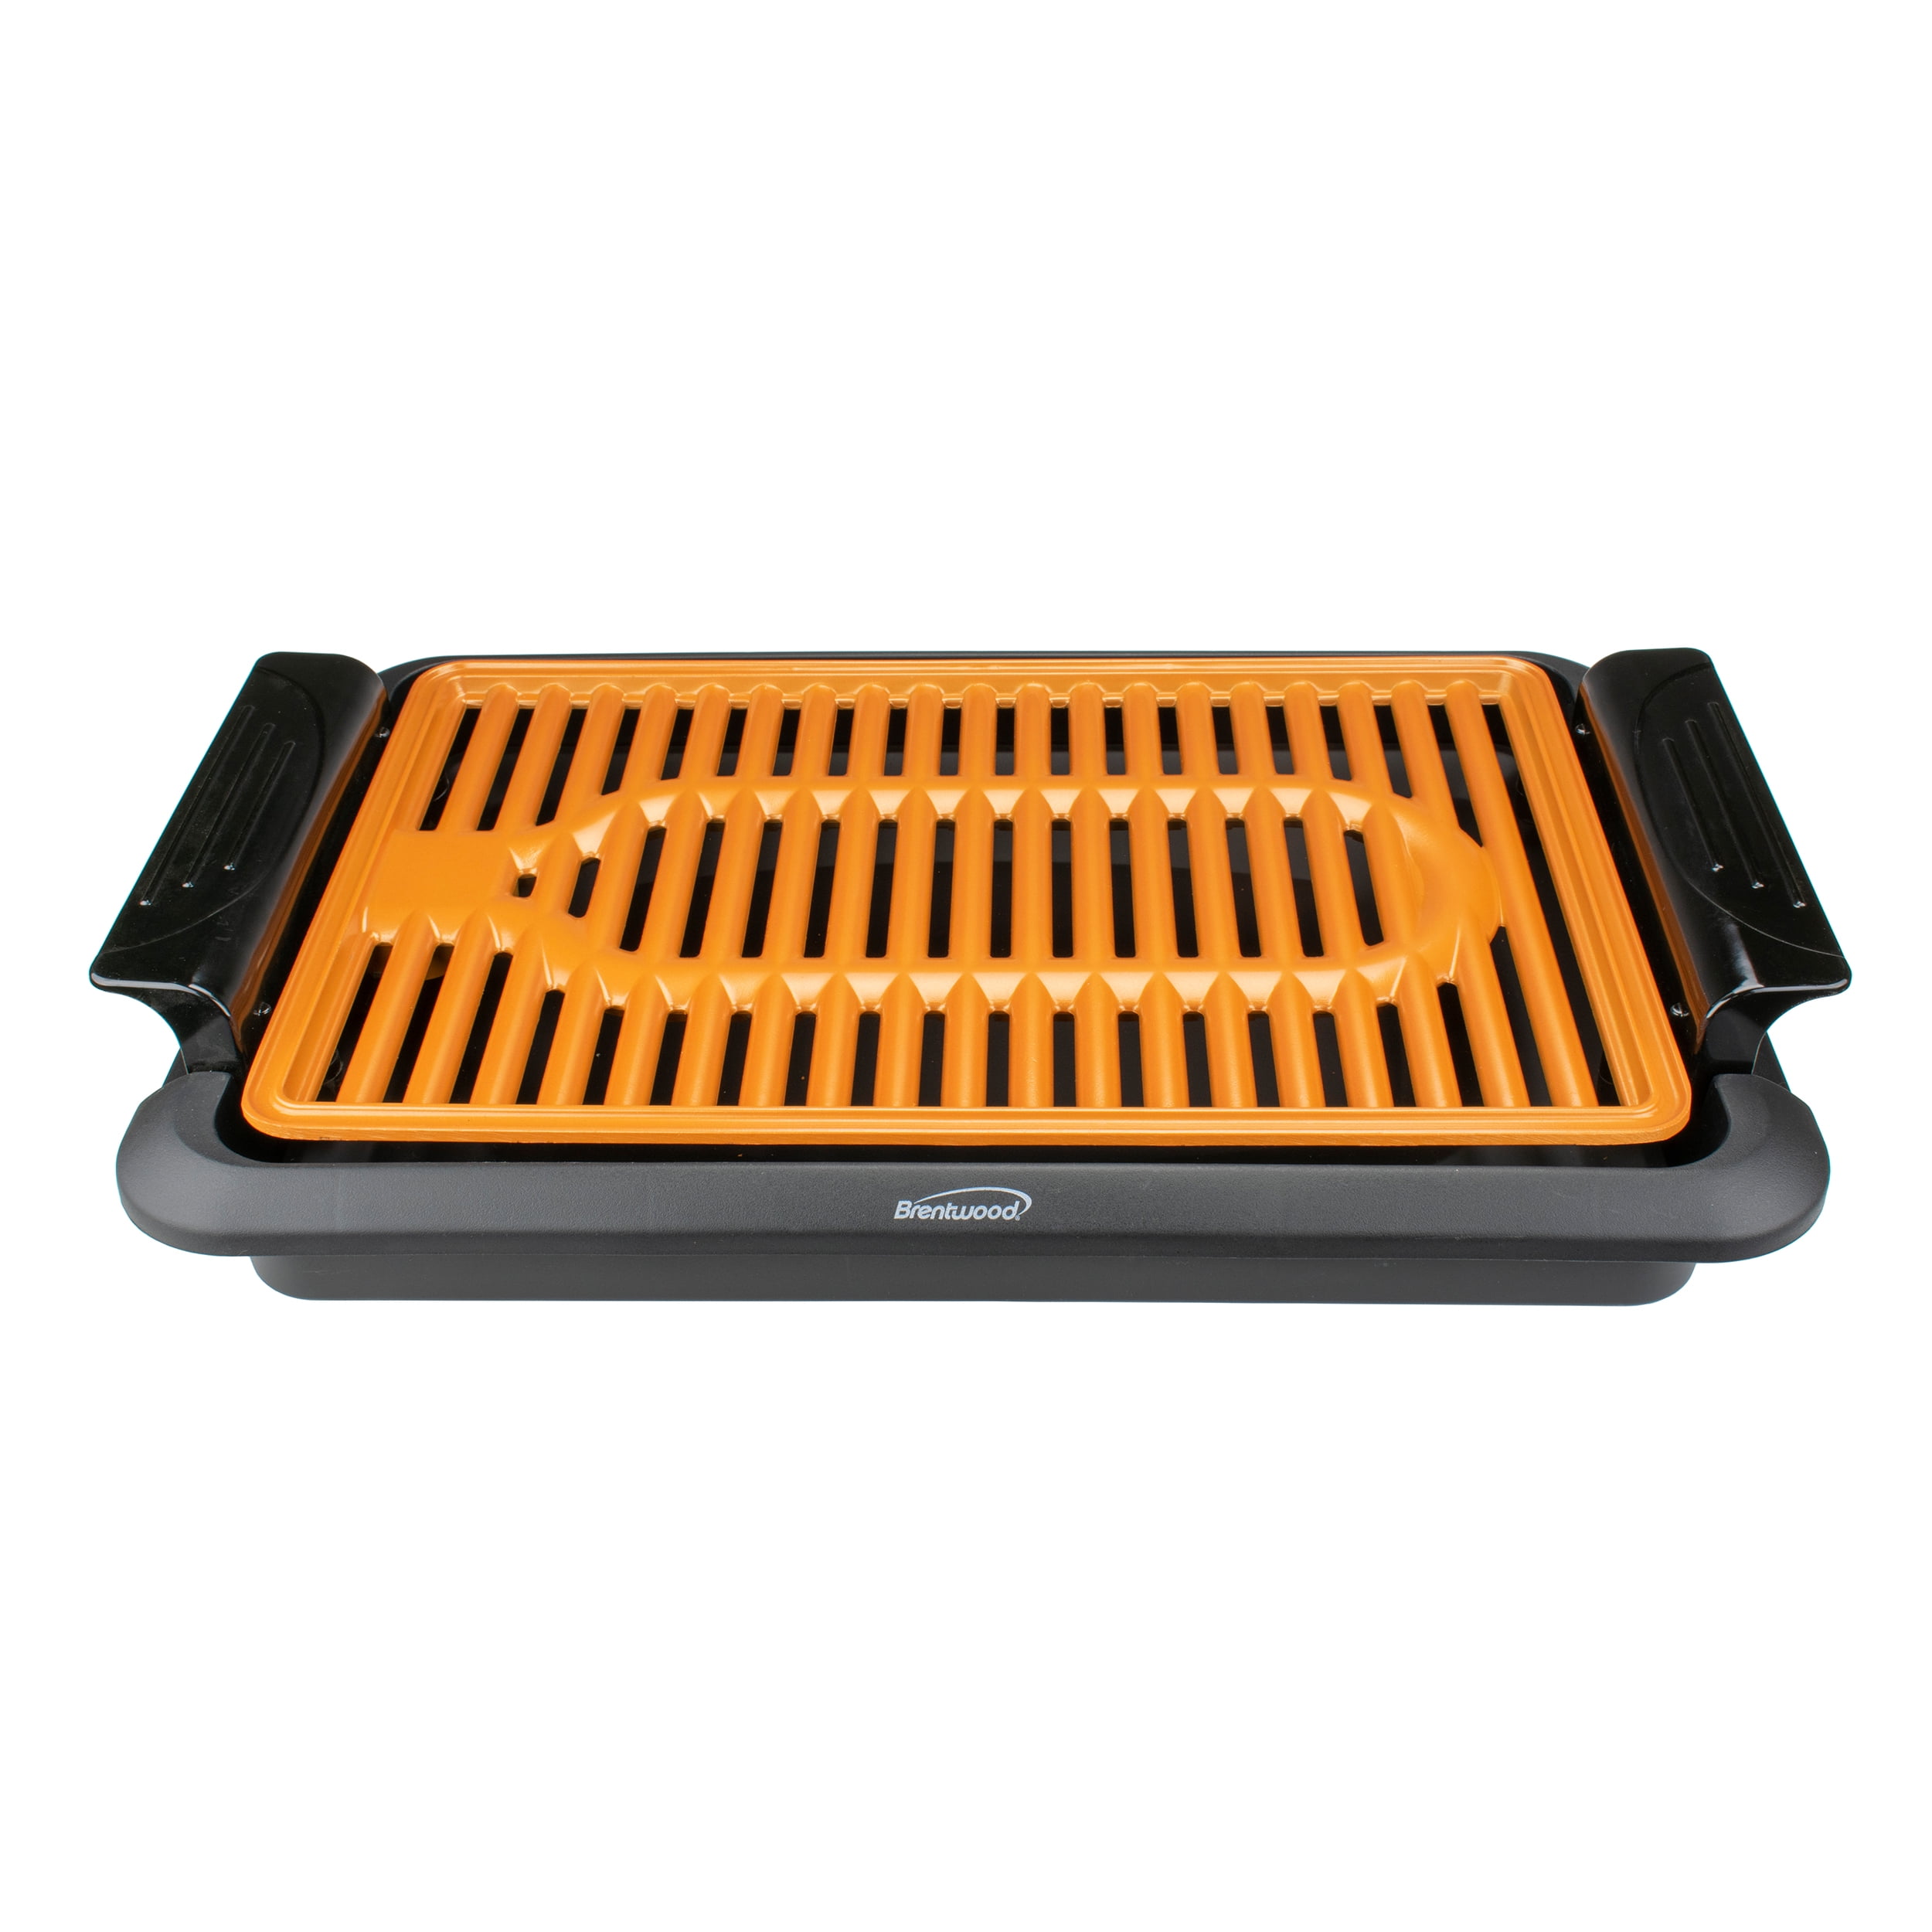 PowerXL Smokeless Grill Only $69.98 on SamsClub.com (Regularly $100), Grill  365 Days a Year!